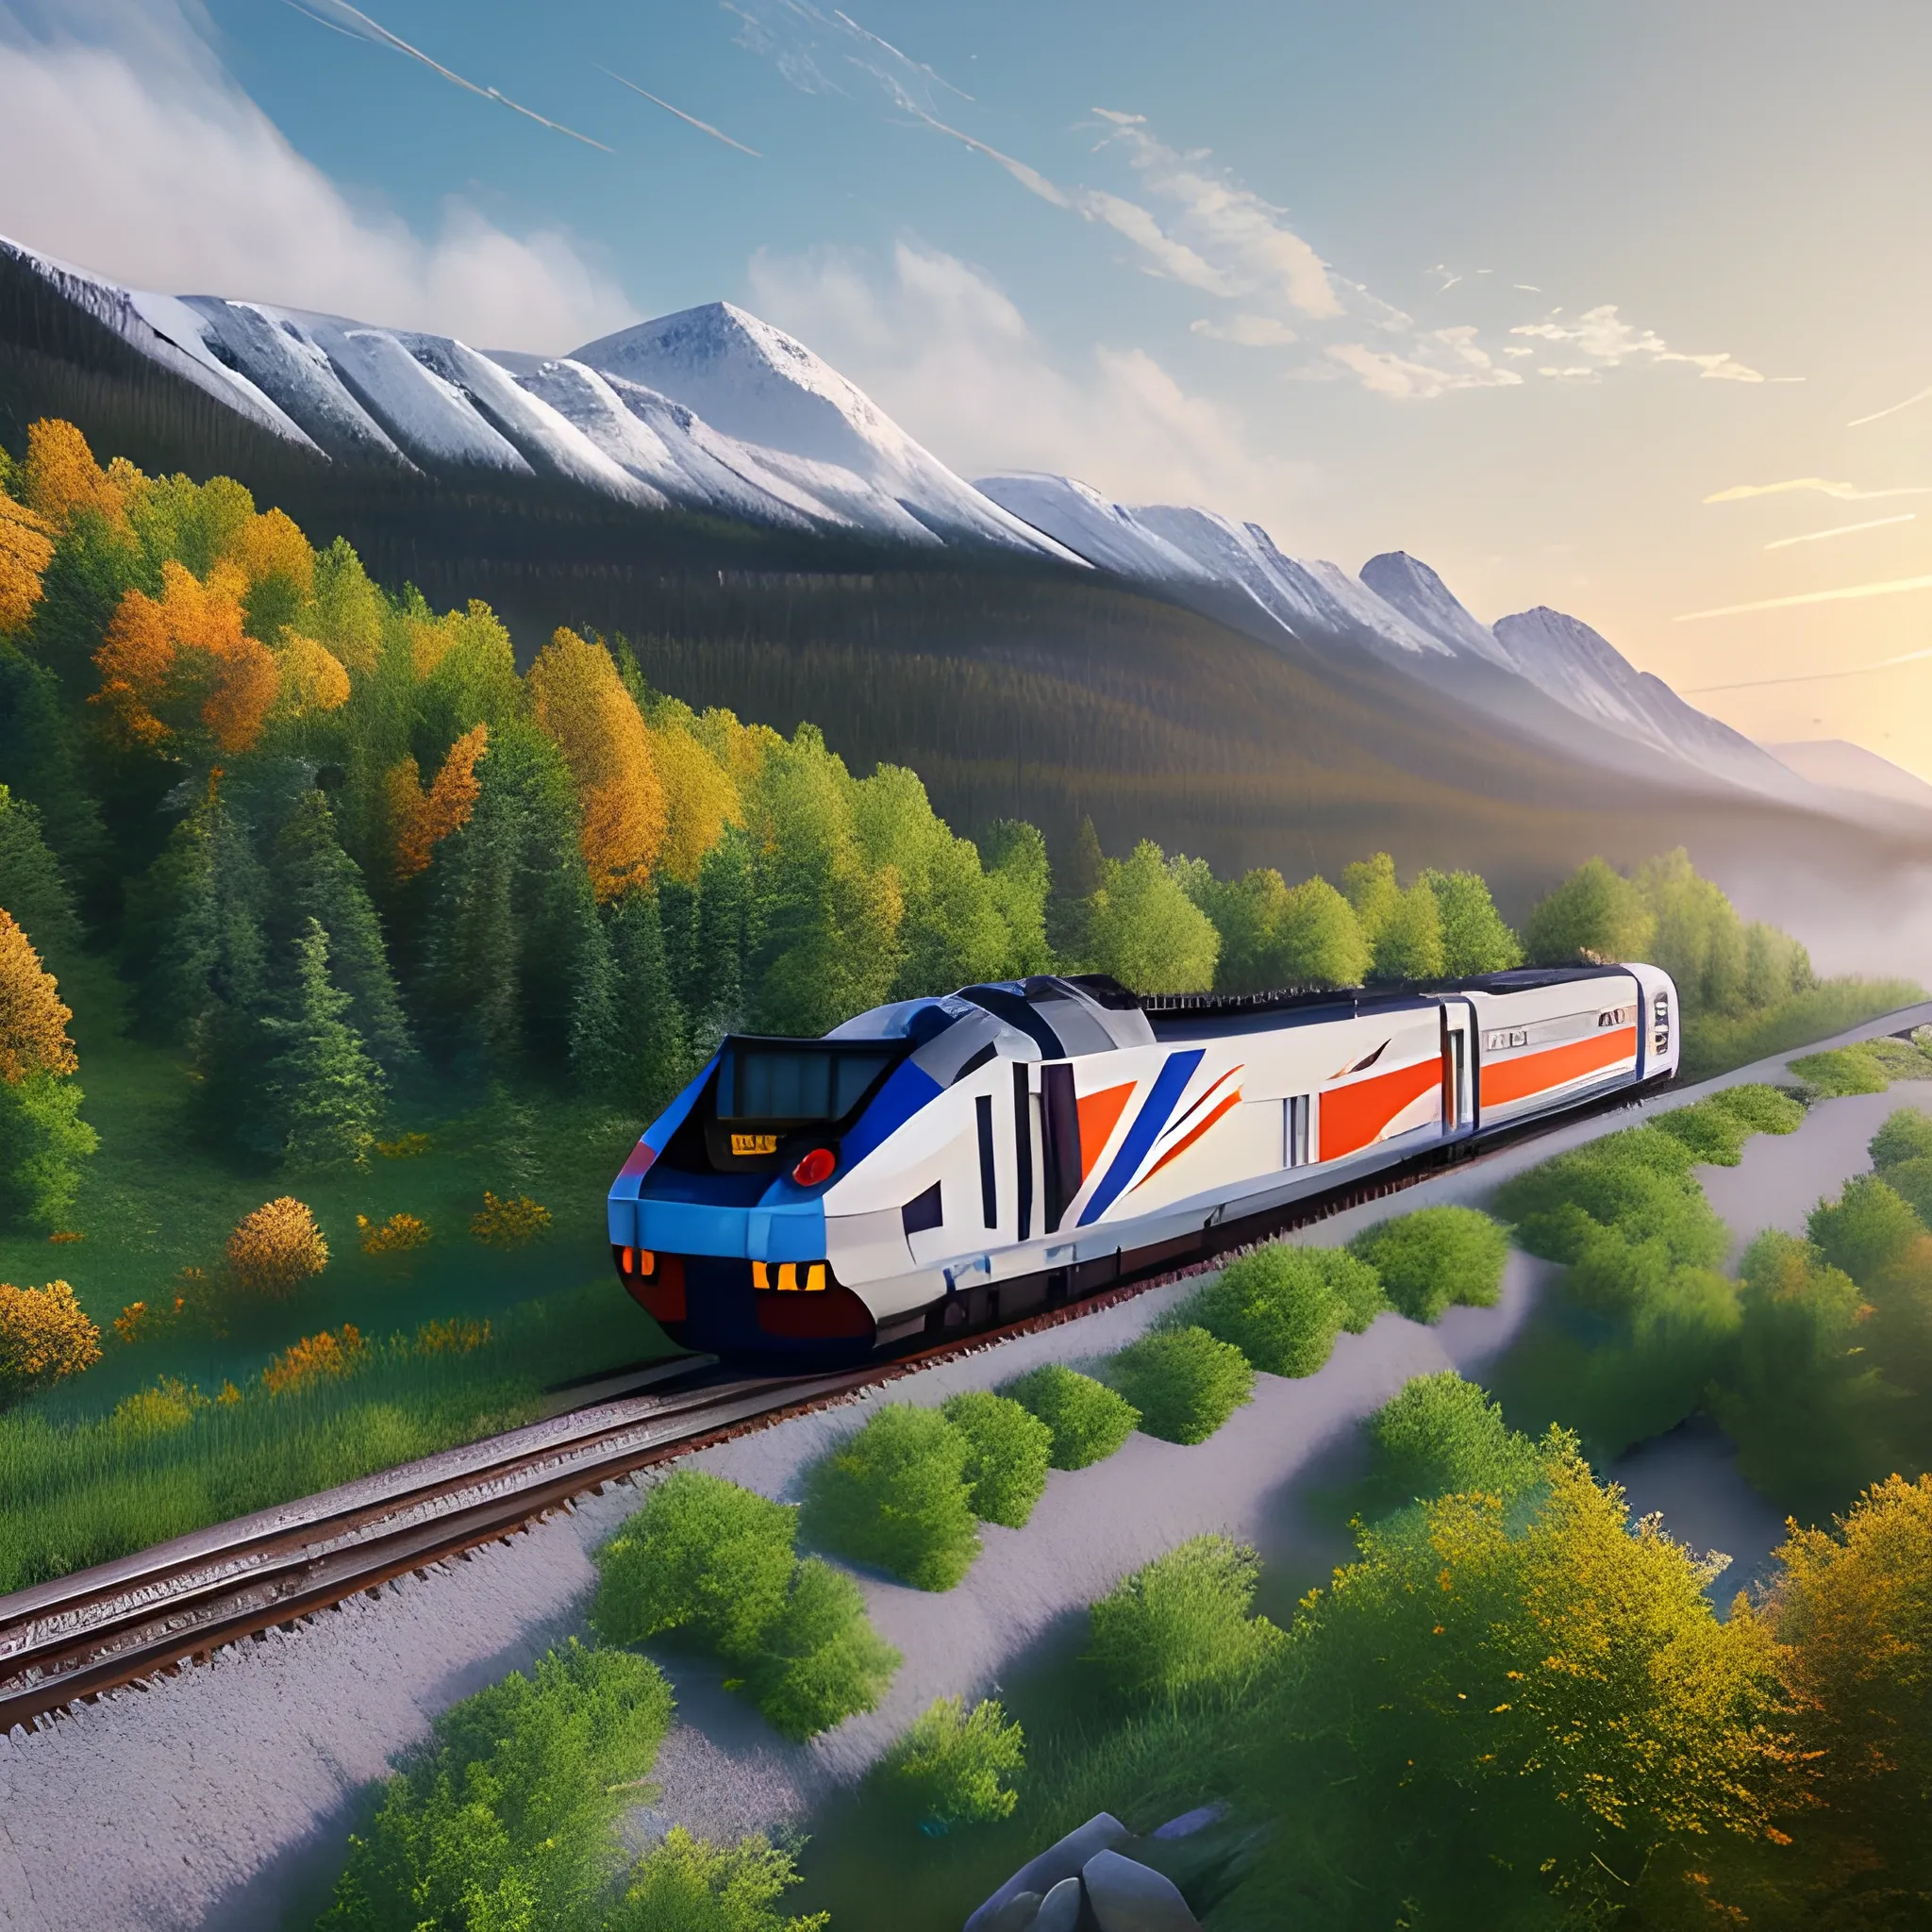 tgv from paris, brand new lego set ( 2 0 2 1 ), retail price 4 5 0, ultra realistic, uhd, 8 ka view from a mountain in Canada, green grass, Indian Summer, leafs falling, fog, warm light, fine details, high definition, realism, sunrise, raytracing, spectacular light, HD, 8k, it starts snowing